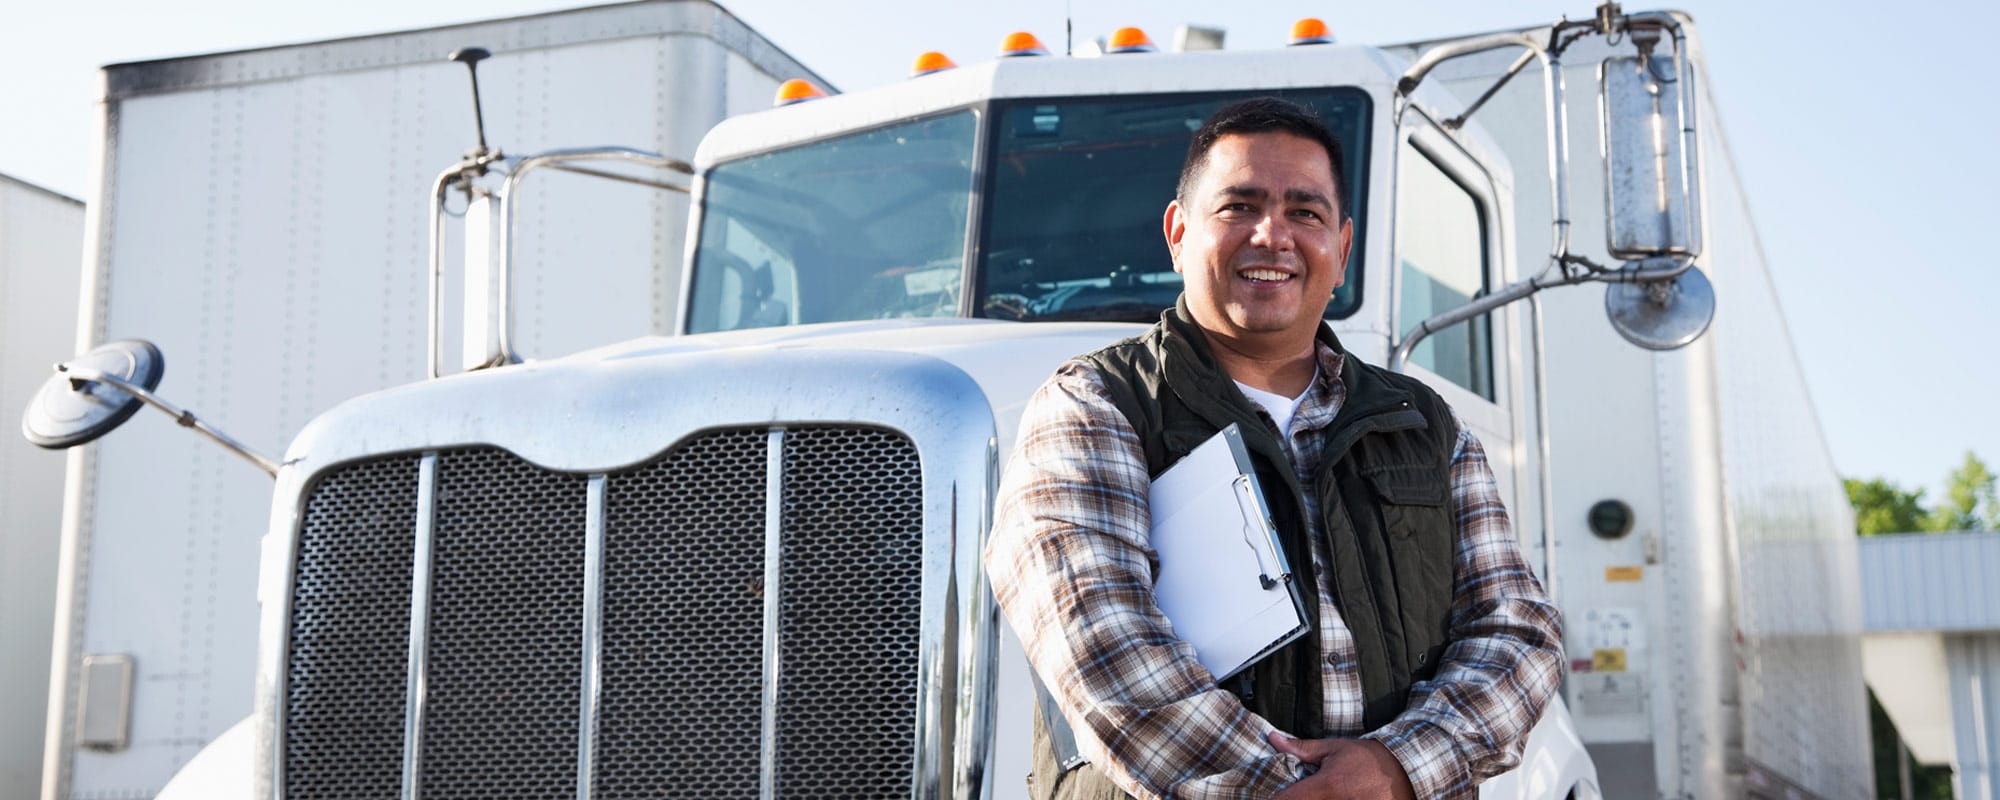 Image of smiling man standing in front of his tractor-trailer